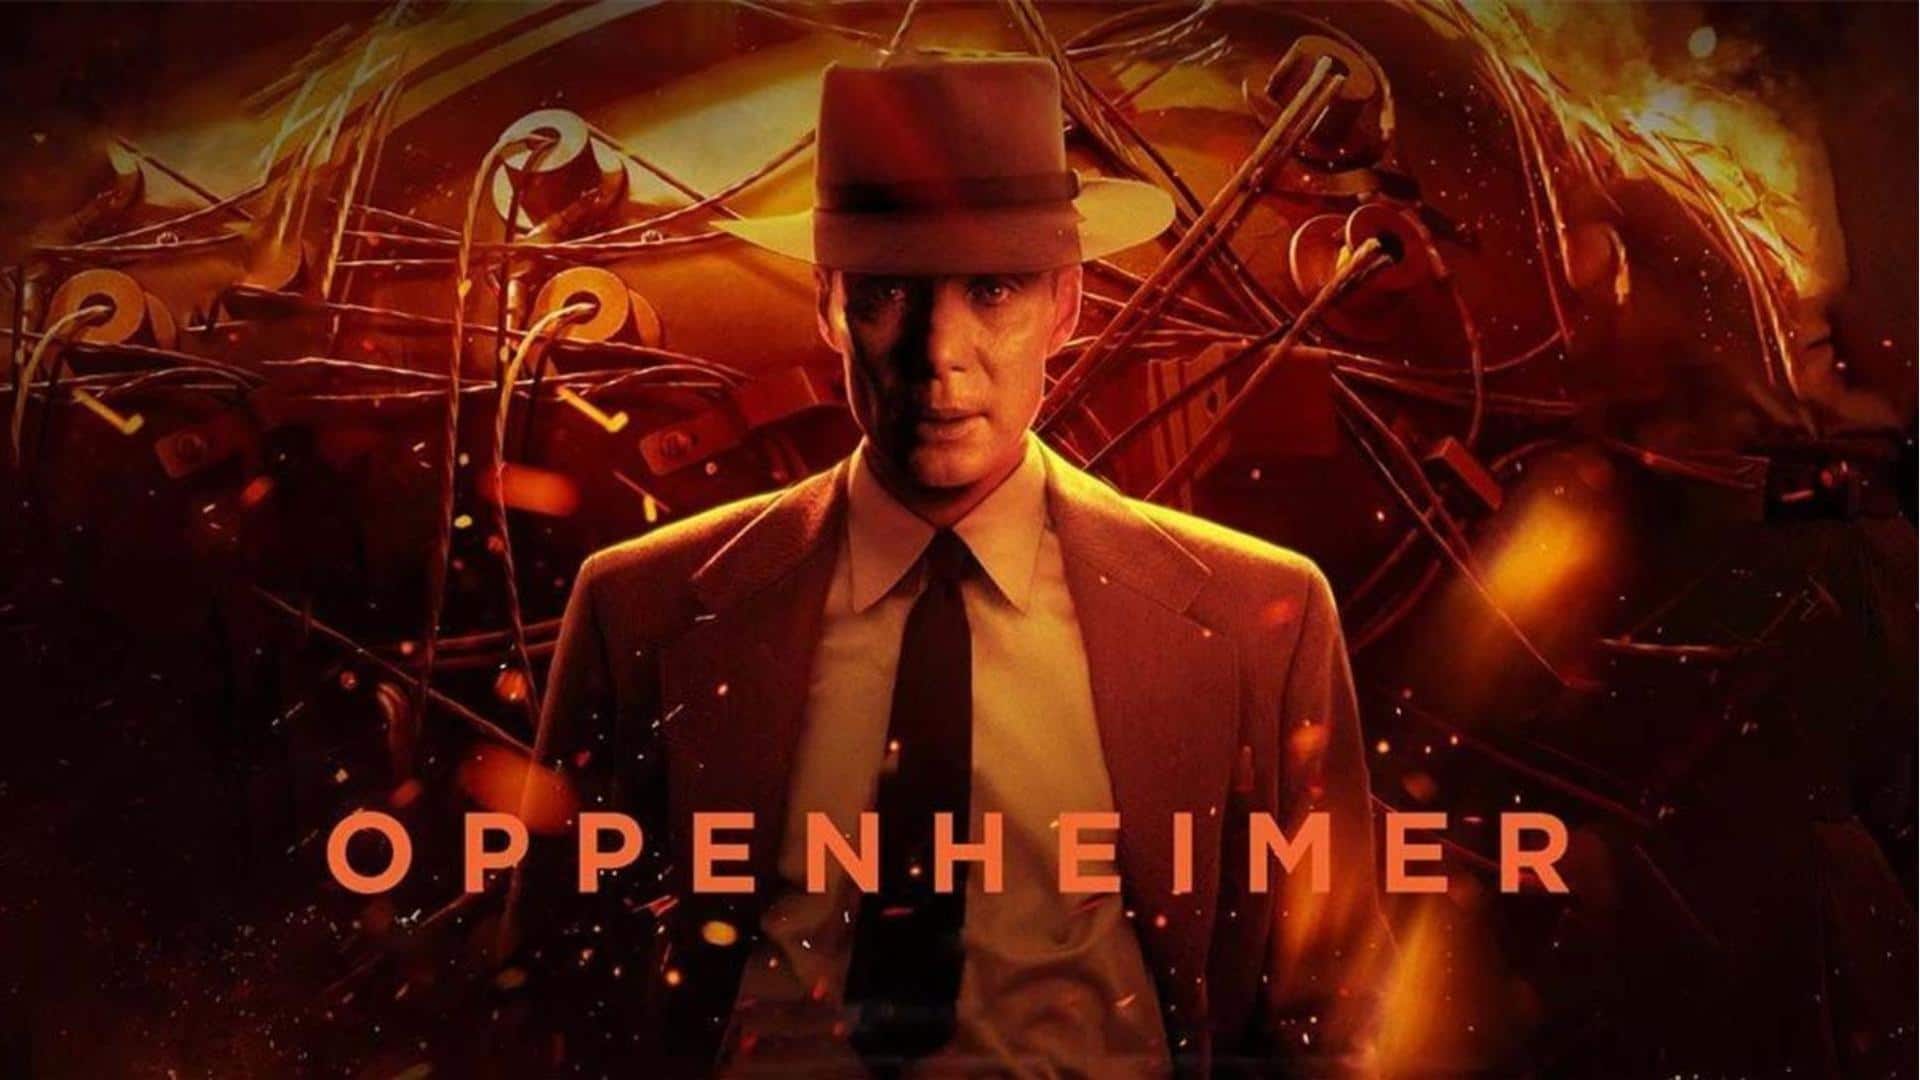 #BoxOfficeCollection: 'Oppenheimer' eyes Rs. 100cr while #BoycottOppenheimer trends on Twitter